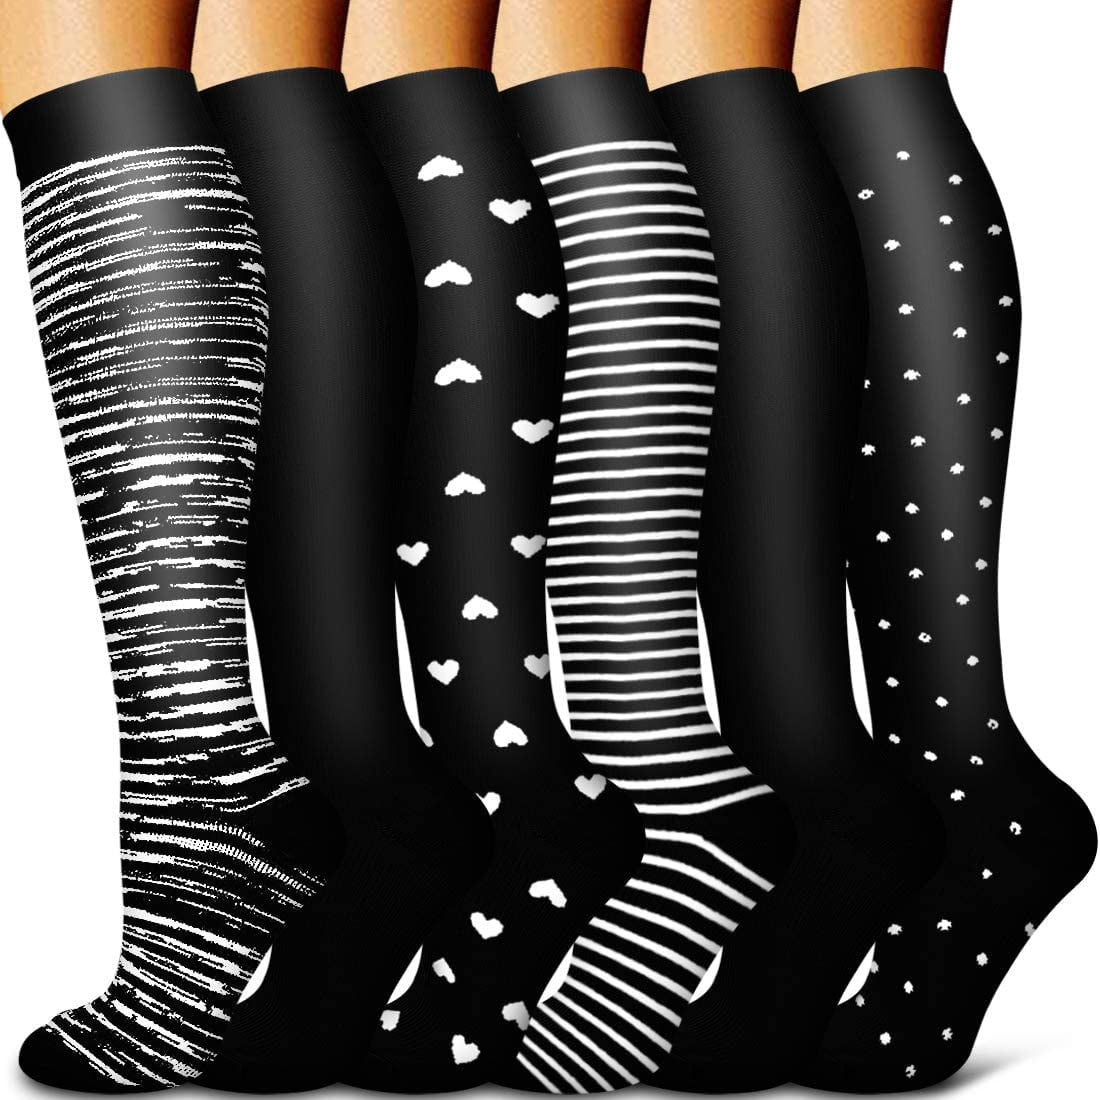 Cycling Flight Travel Hiking 6 Pairs Compression Socks for Women & Men Circulation 20-30 mmHg Support for Medical Running